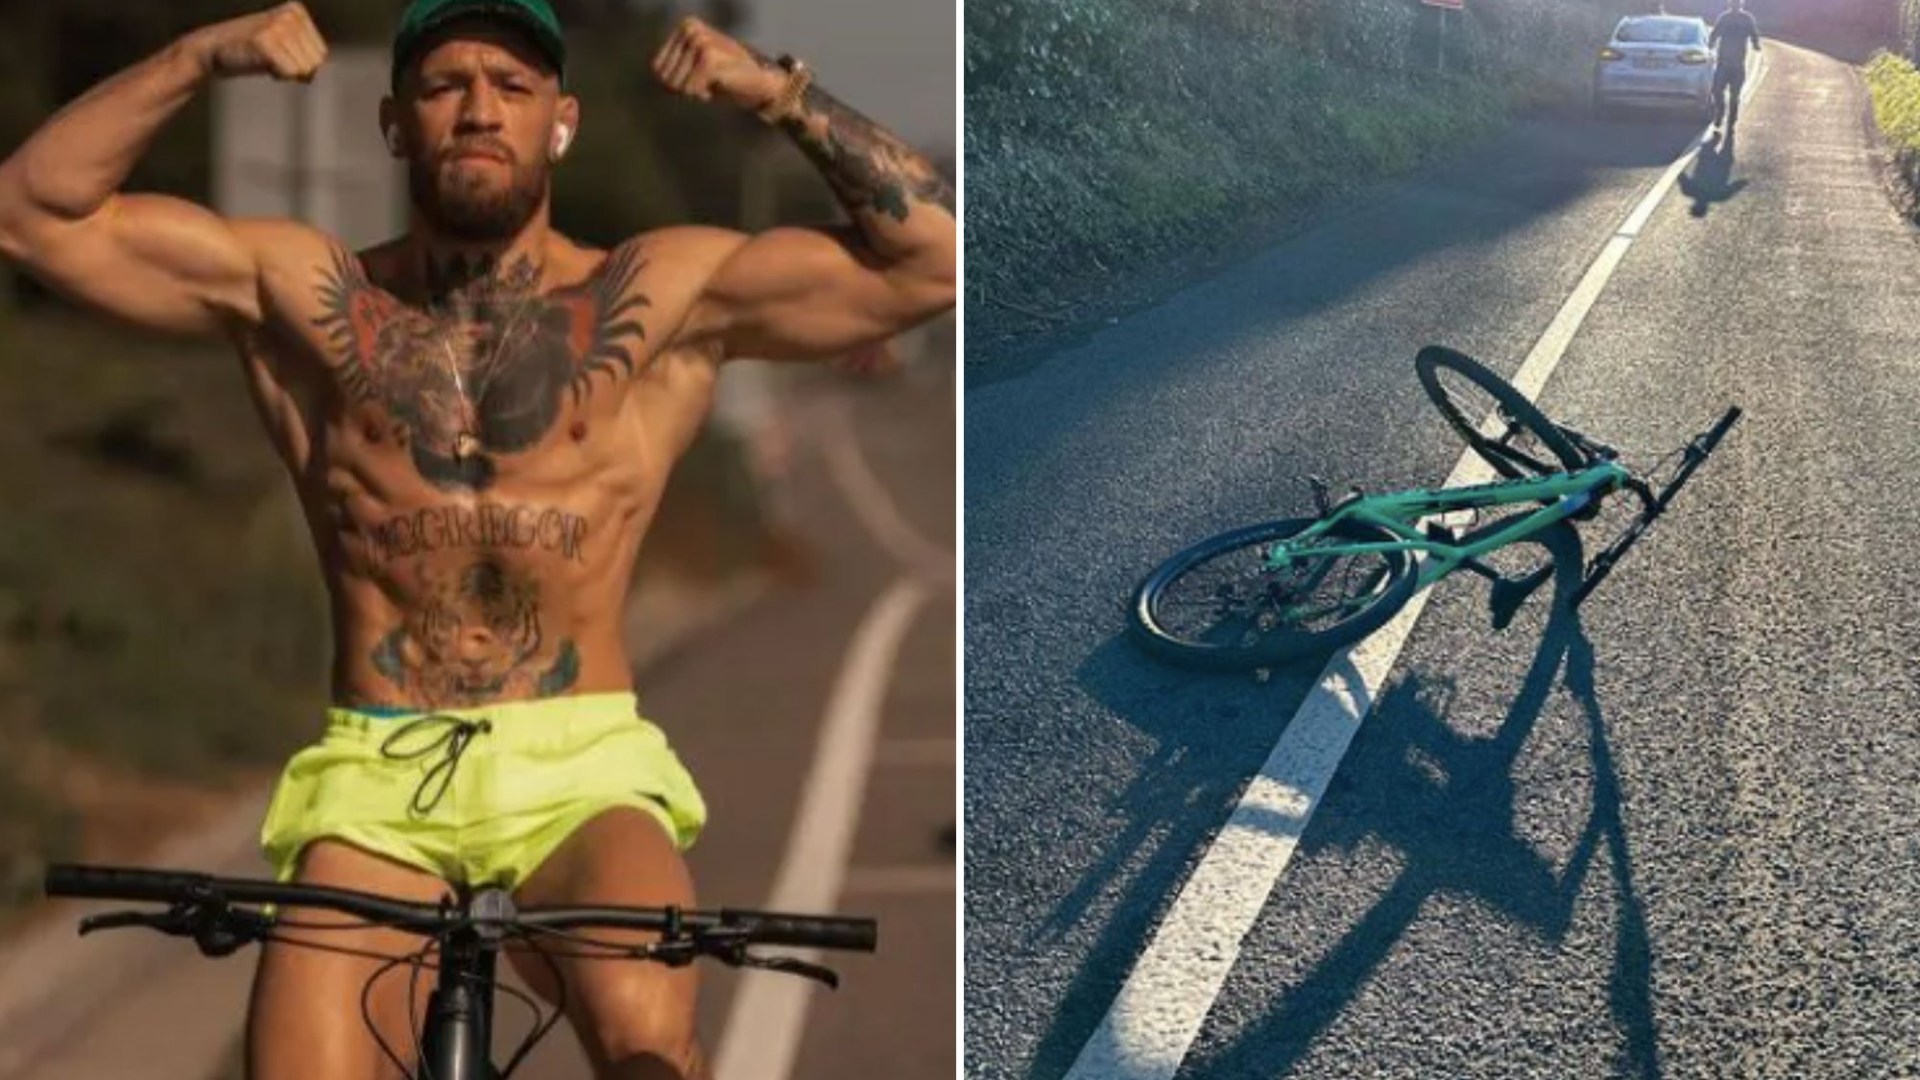 Conor McGregor's Cycling Trauma: UFC Star Still Shaken After Accident